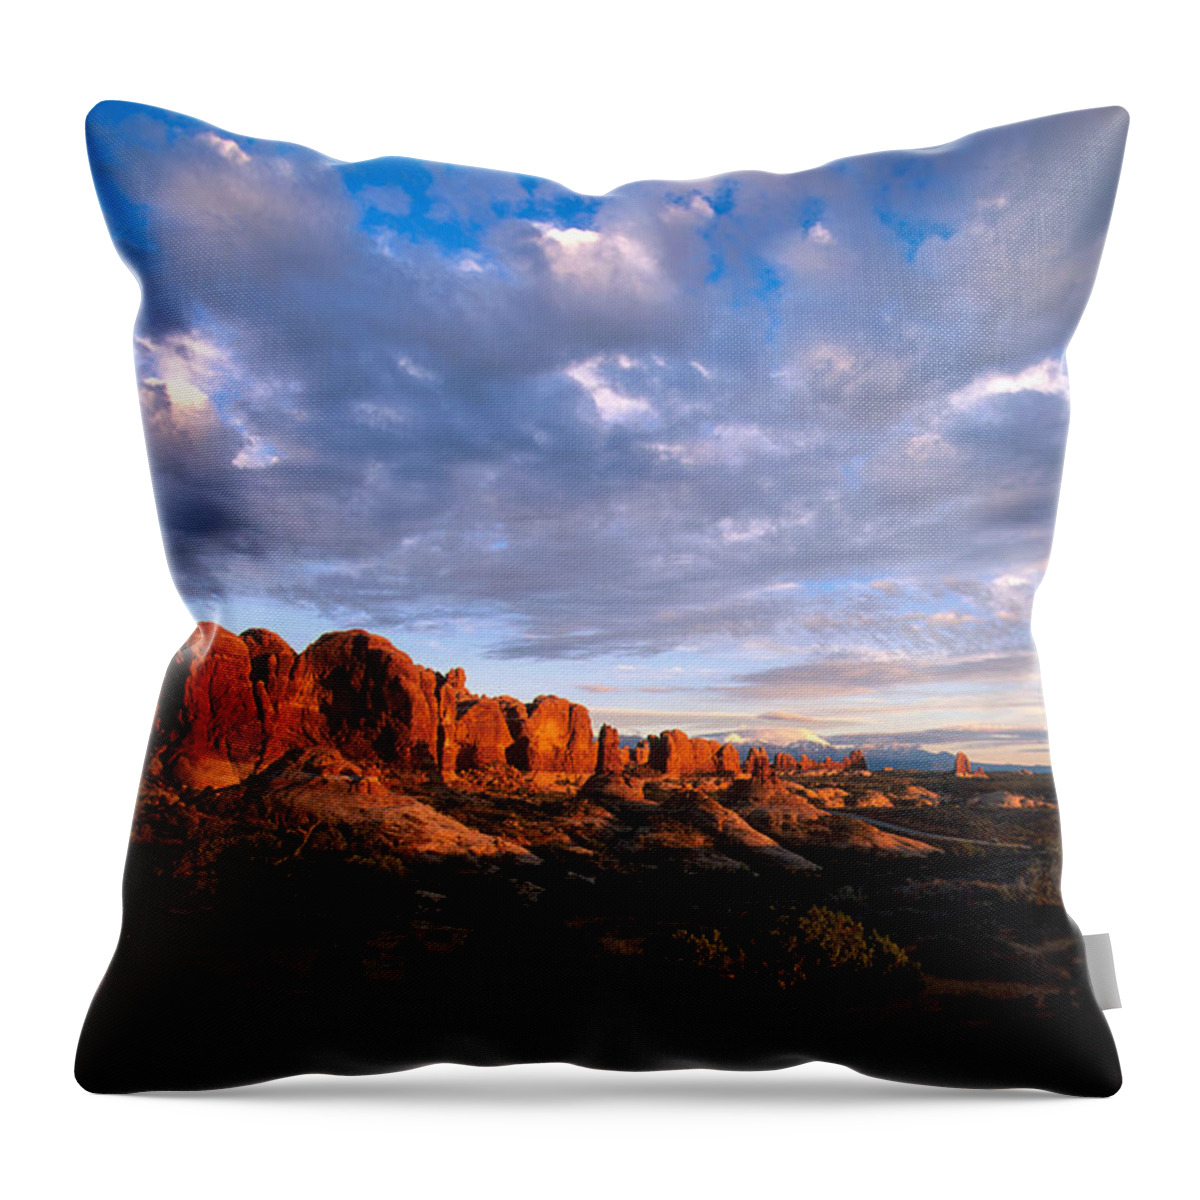 Estock Throw Pillow featuring the digital art Arches National Park by Heeb Photos